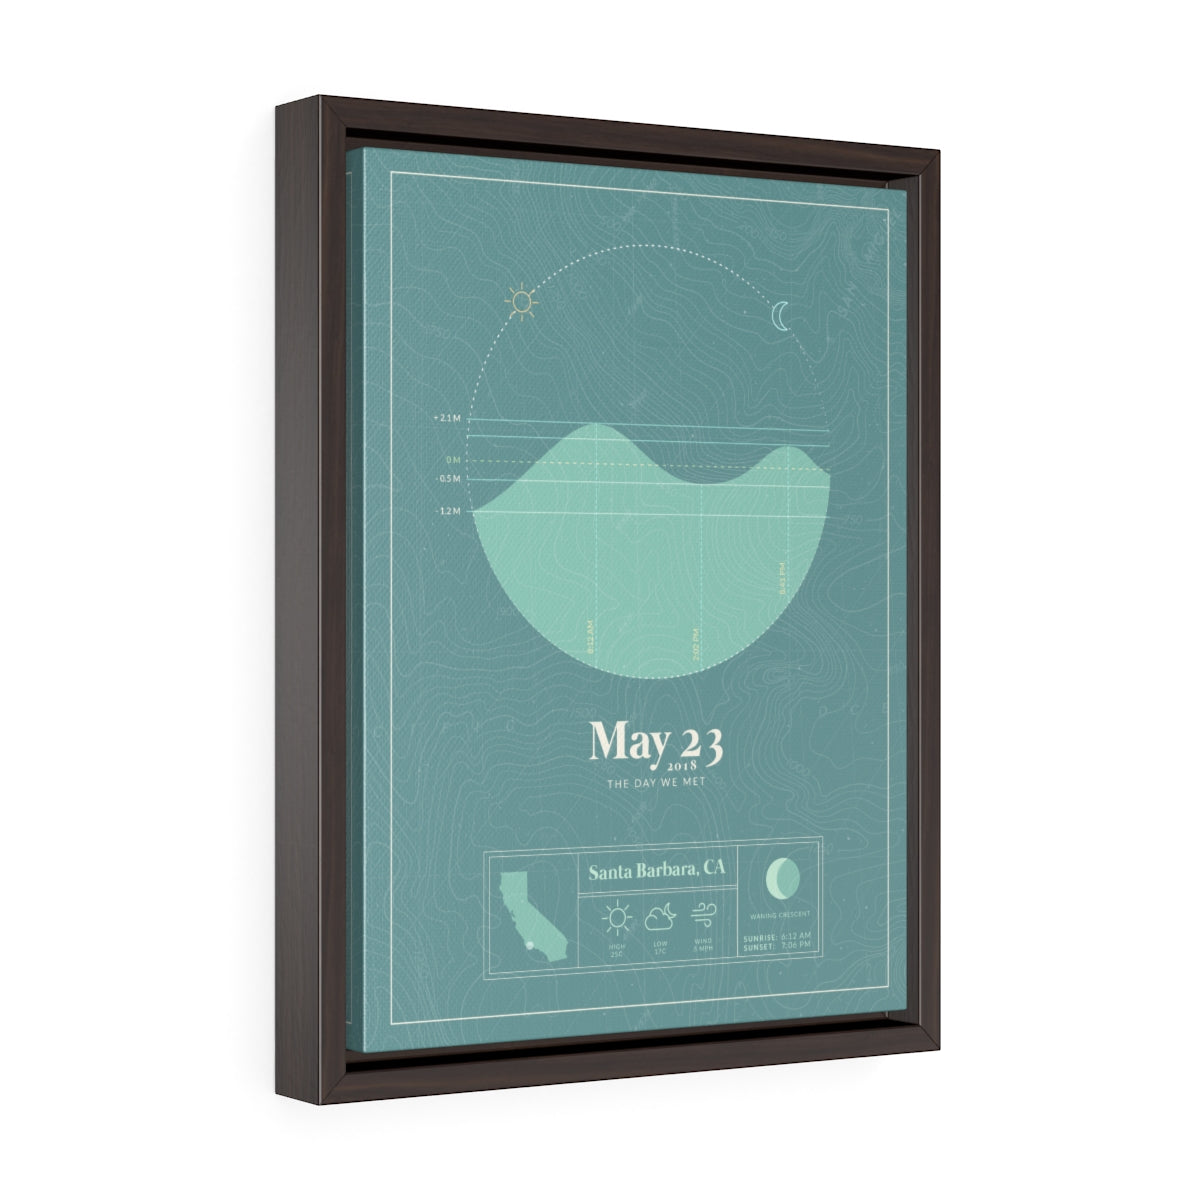 dark brown framed floating canvas of the personalized tide map by salt atlas in the Tahiti teal color on a white background. These are custom posters showing the tide, weather, and moon phase for a special day, like an anniversary or birthday.